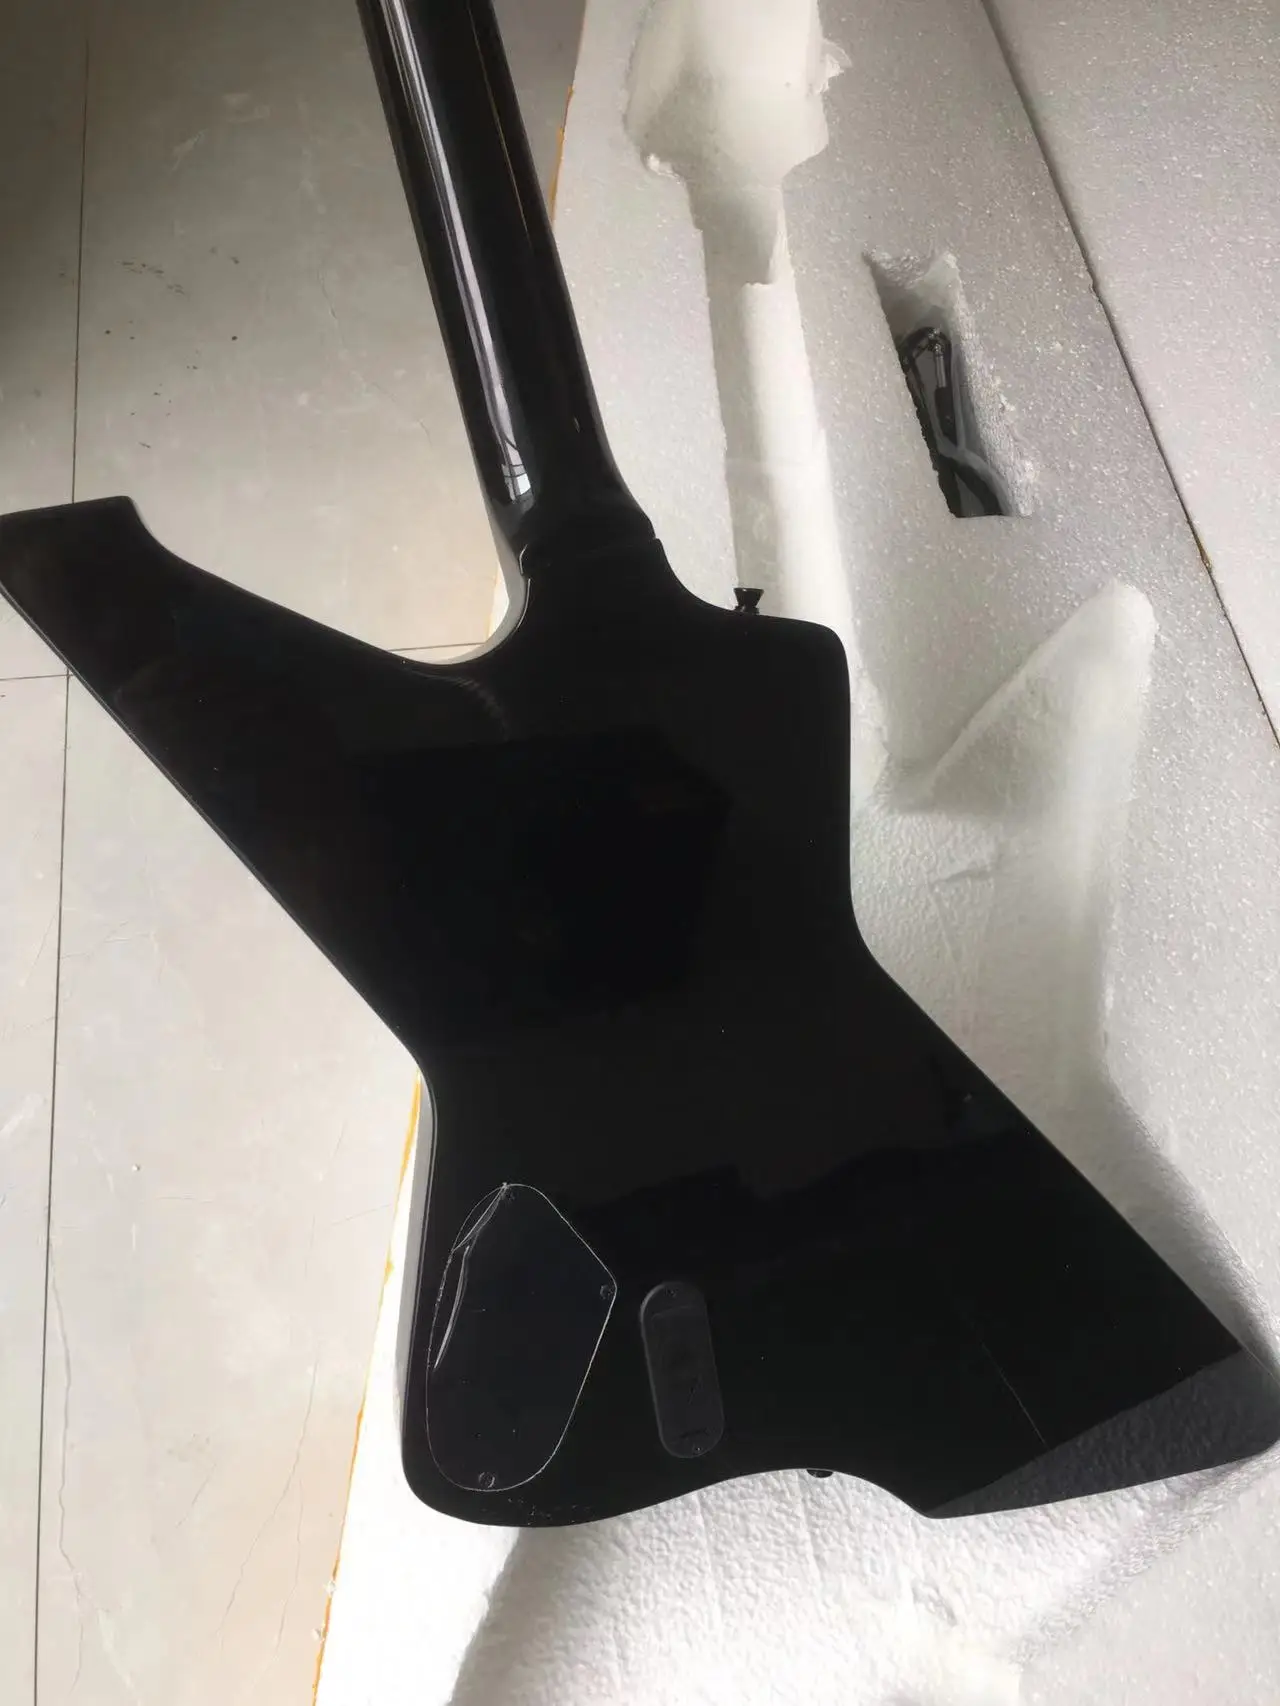 Heavy Metal Ironic James Hetfield Gloss Black Explorer Electric Guitar Man to Wolf Inlay, EMG Active Pickup 9V Battery Box  CZCX images - 6